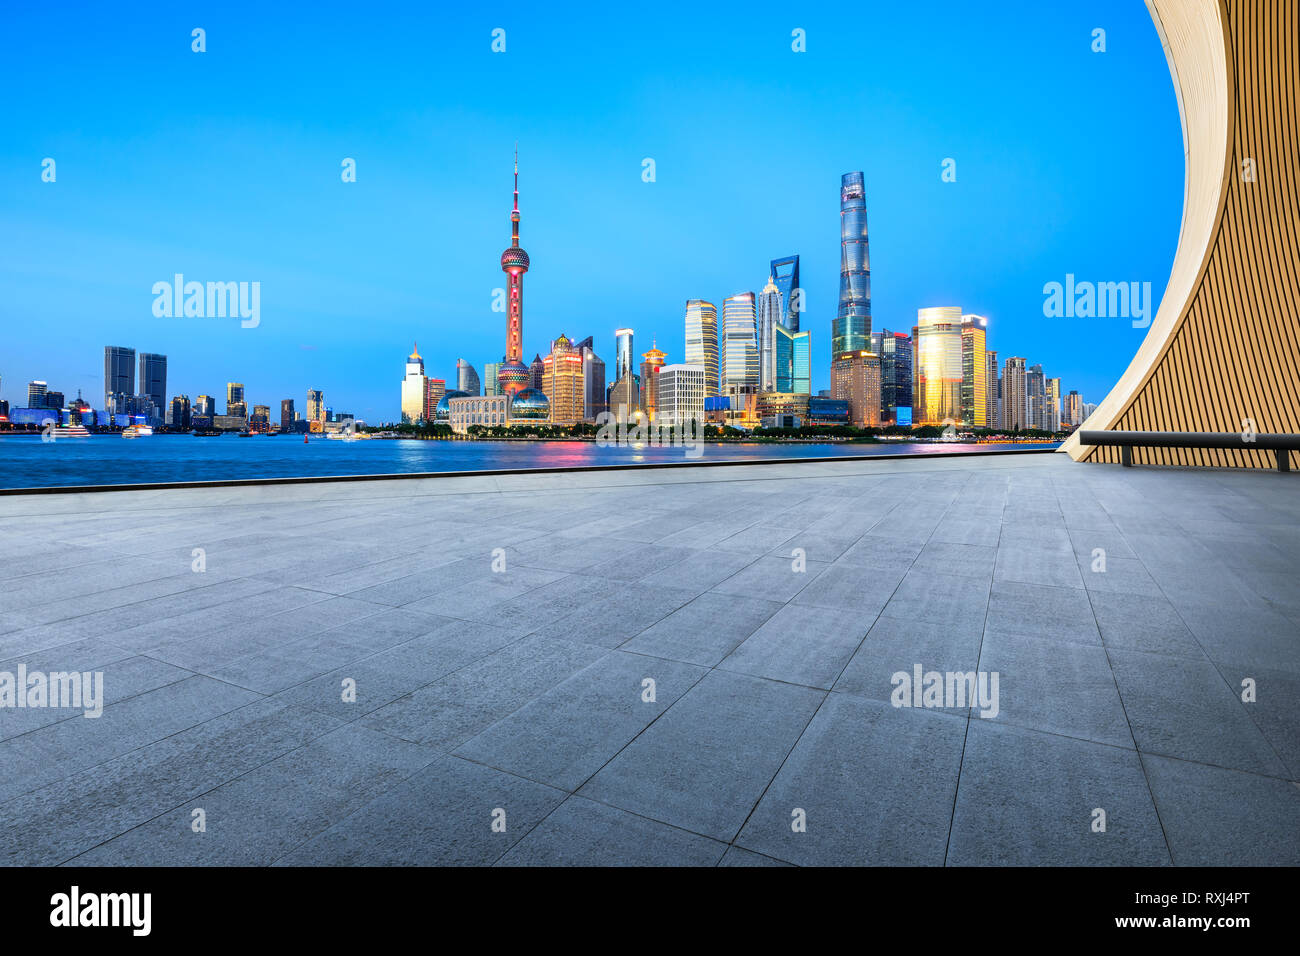 Empty square floor with panoramic city skyline in shanghai at night,China Stock Photo